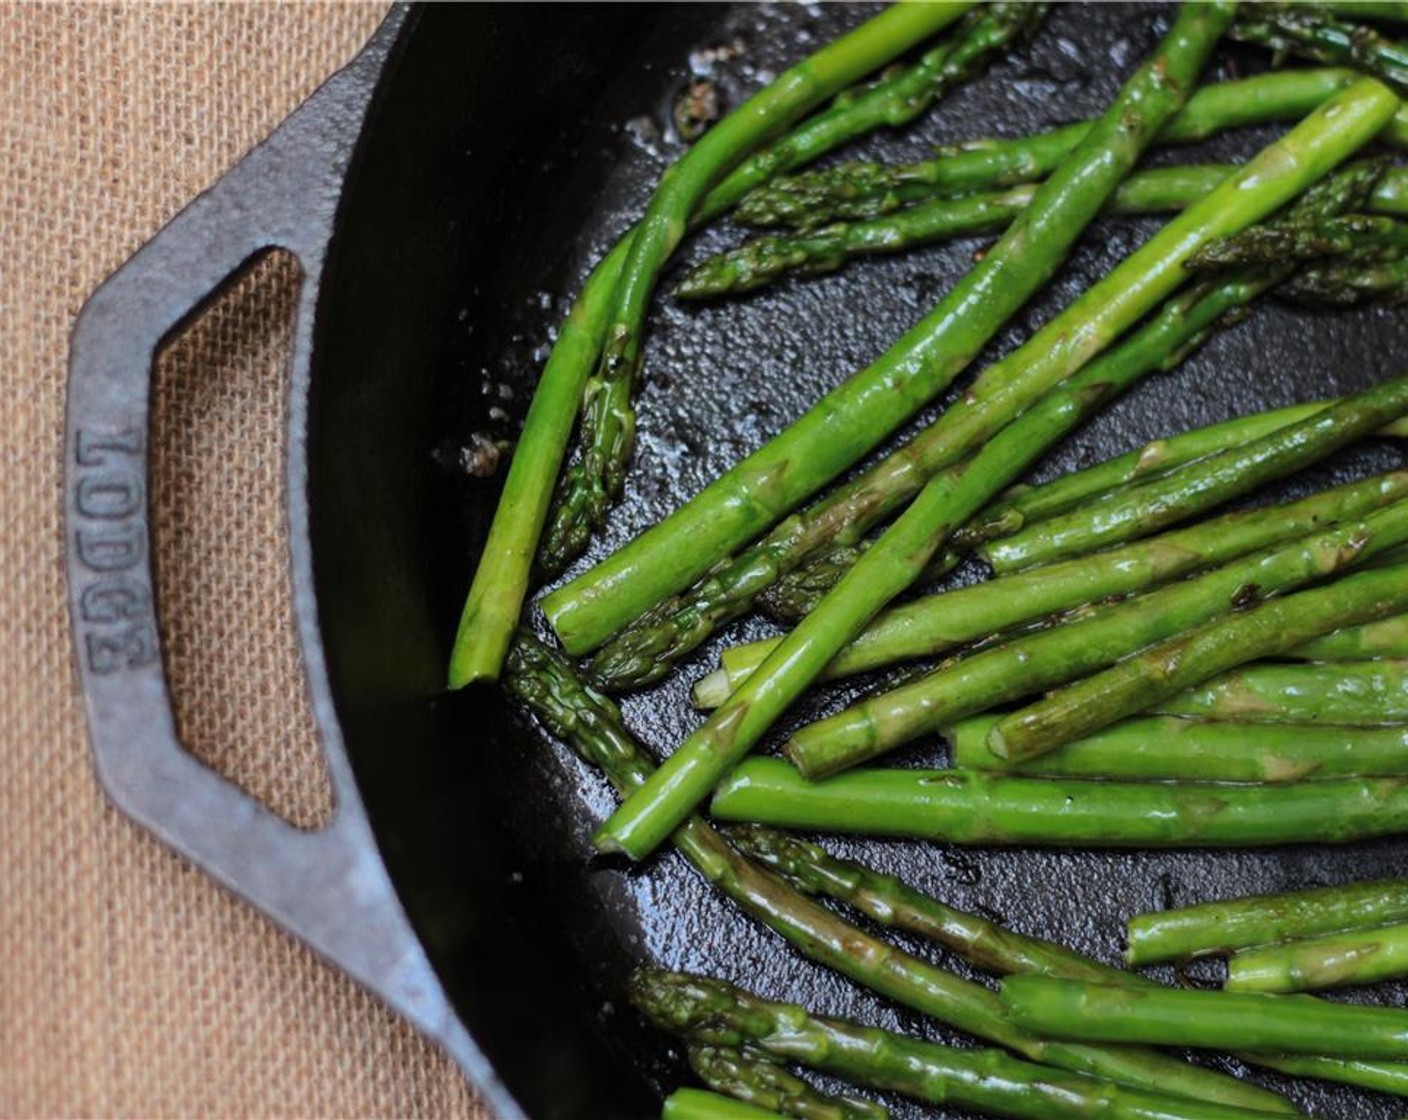 step 8 To the same skillet, still set over medium heat, add the Olive Oil (1/2 Tbsp) and the asparagus spears, season with kosher salt (to taste), and cook for 7 to 10 minutes, stirring occasionally, until the asparagus is tender.